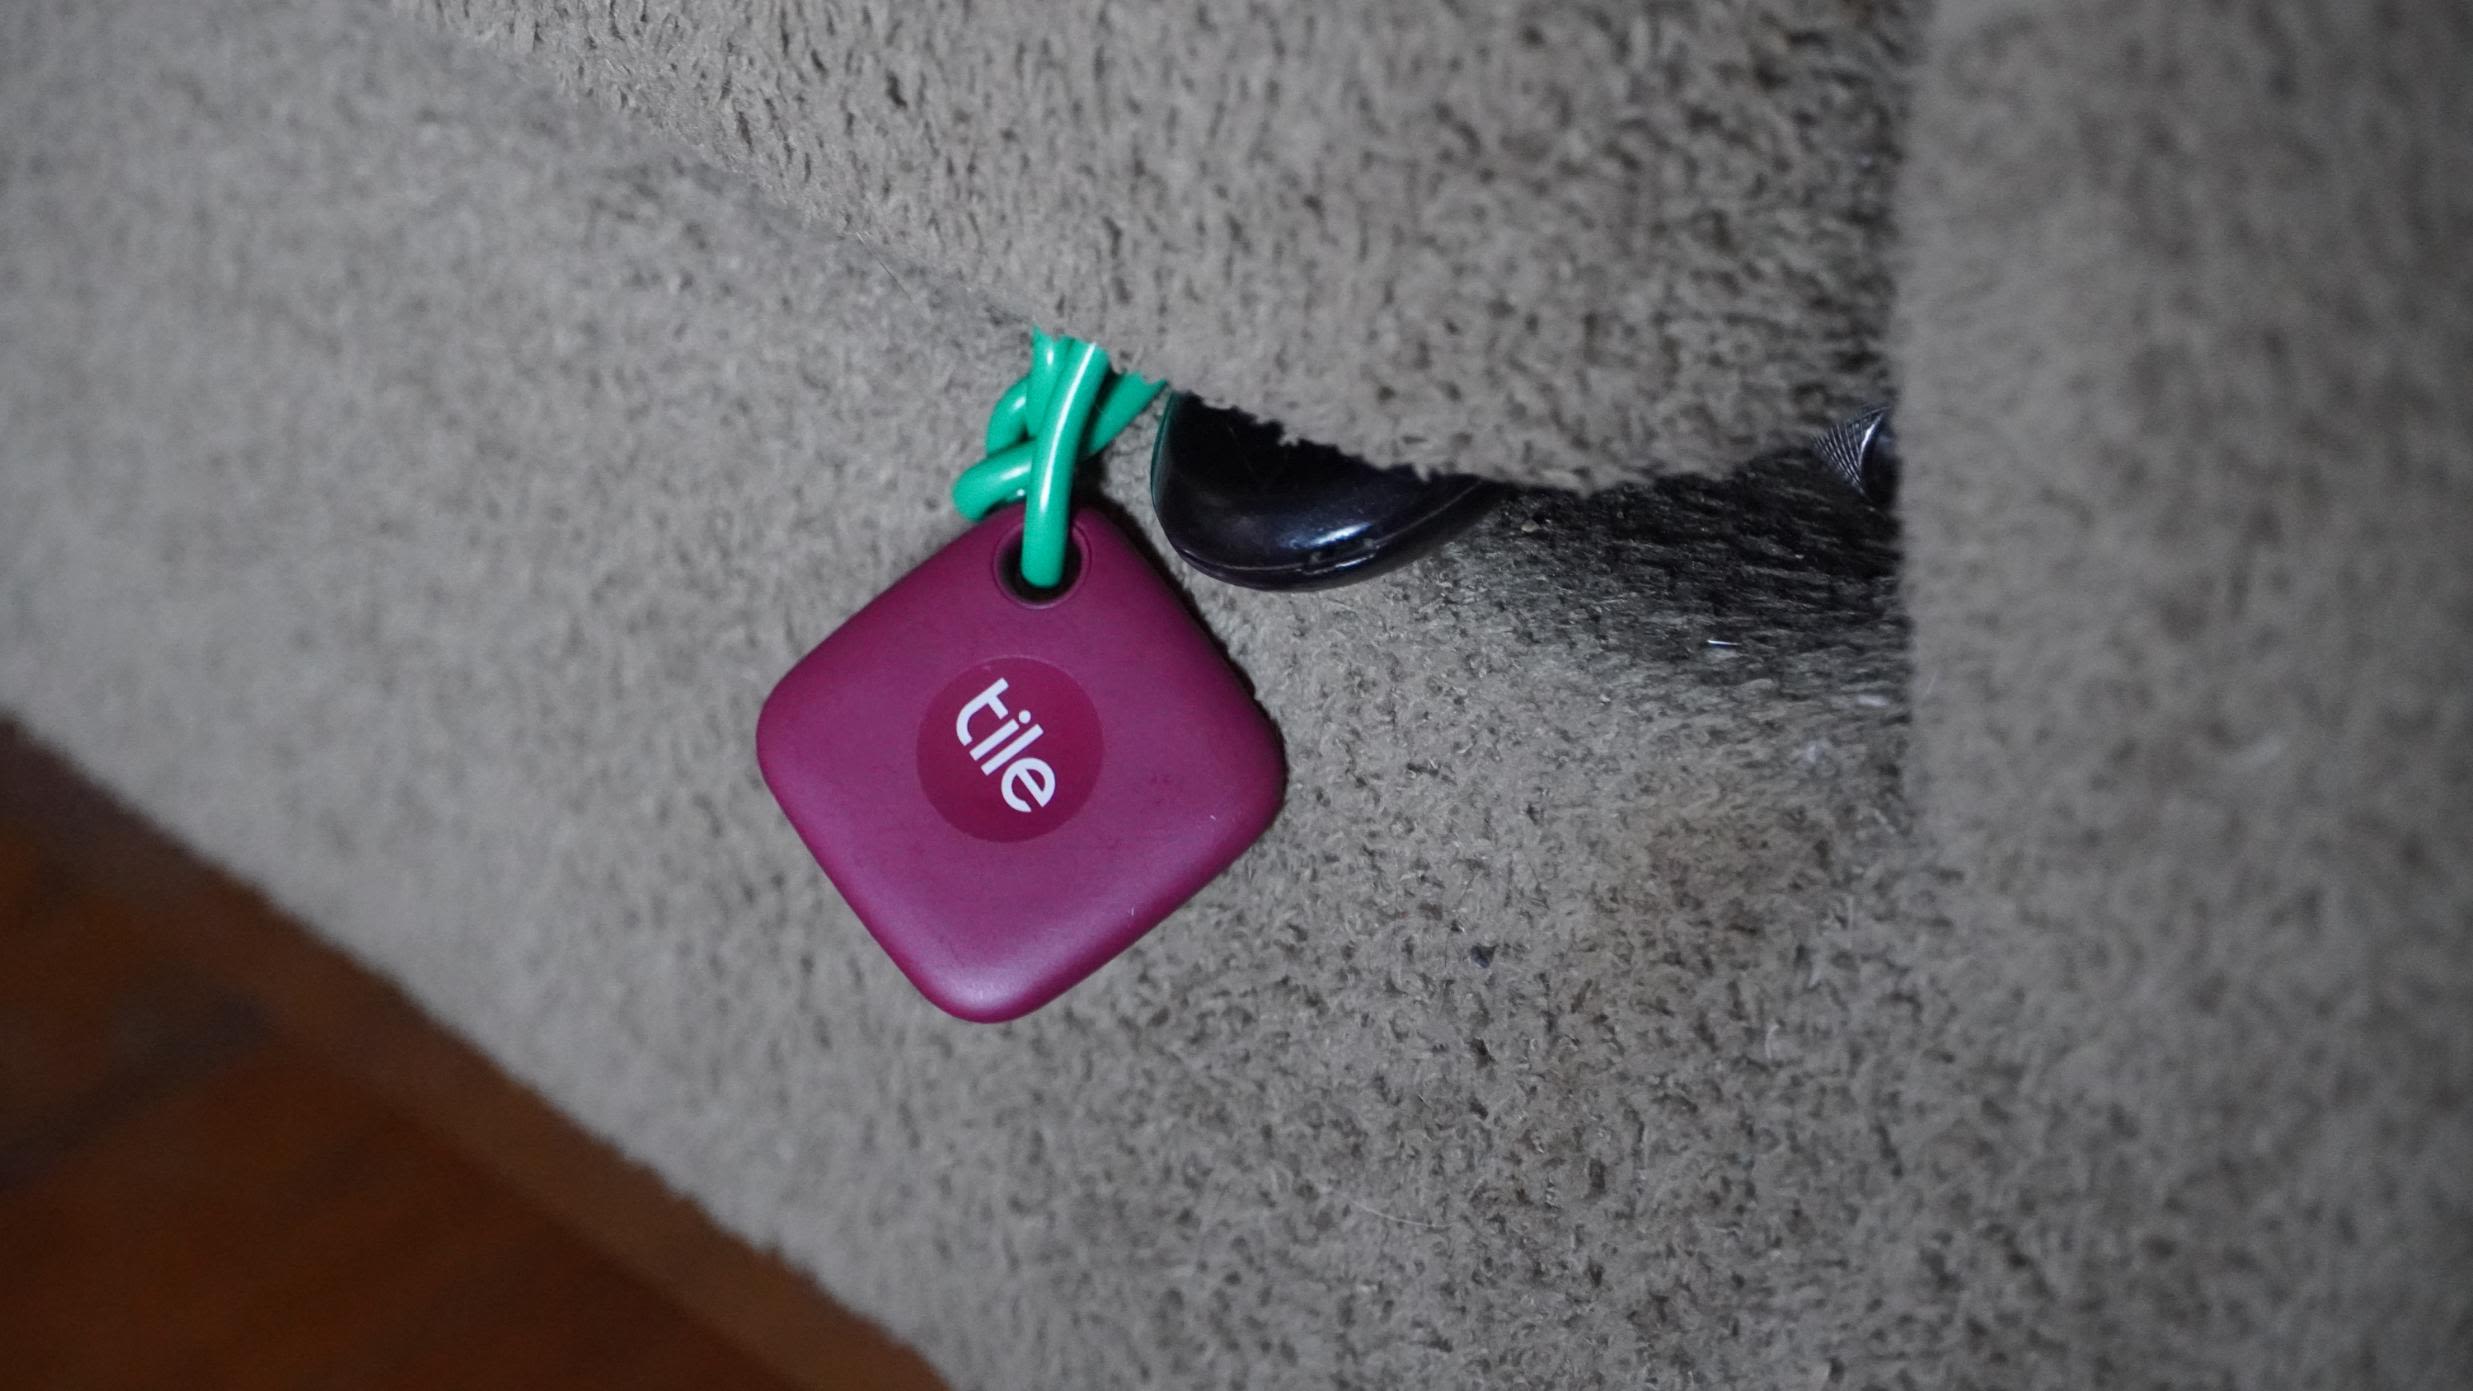 Tile 2021 Bluetooth Trackers Review: Good Trackers, If You Use Android